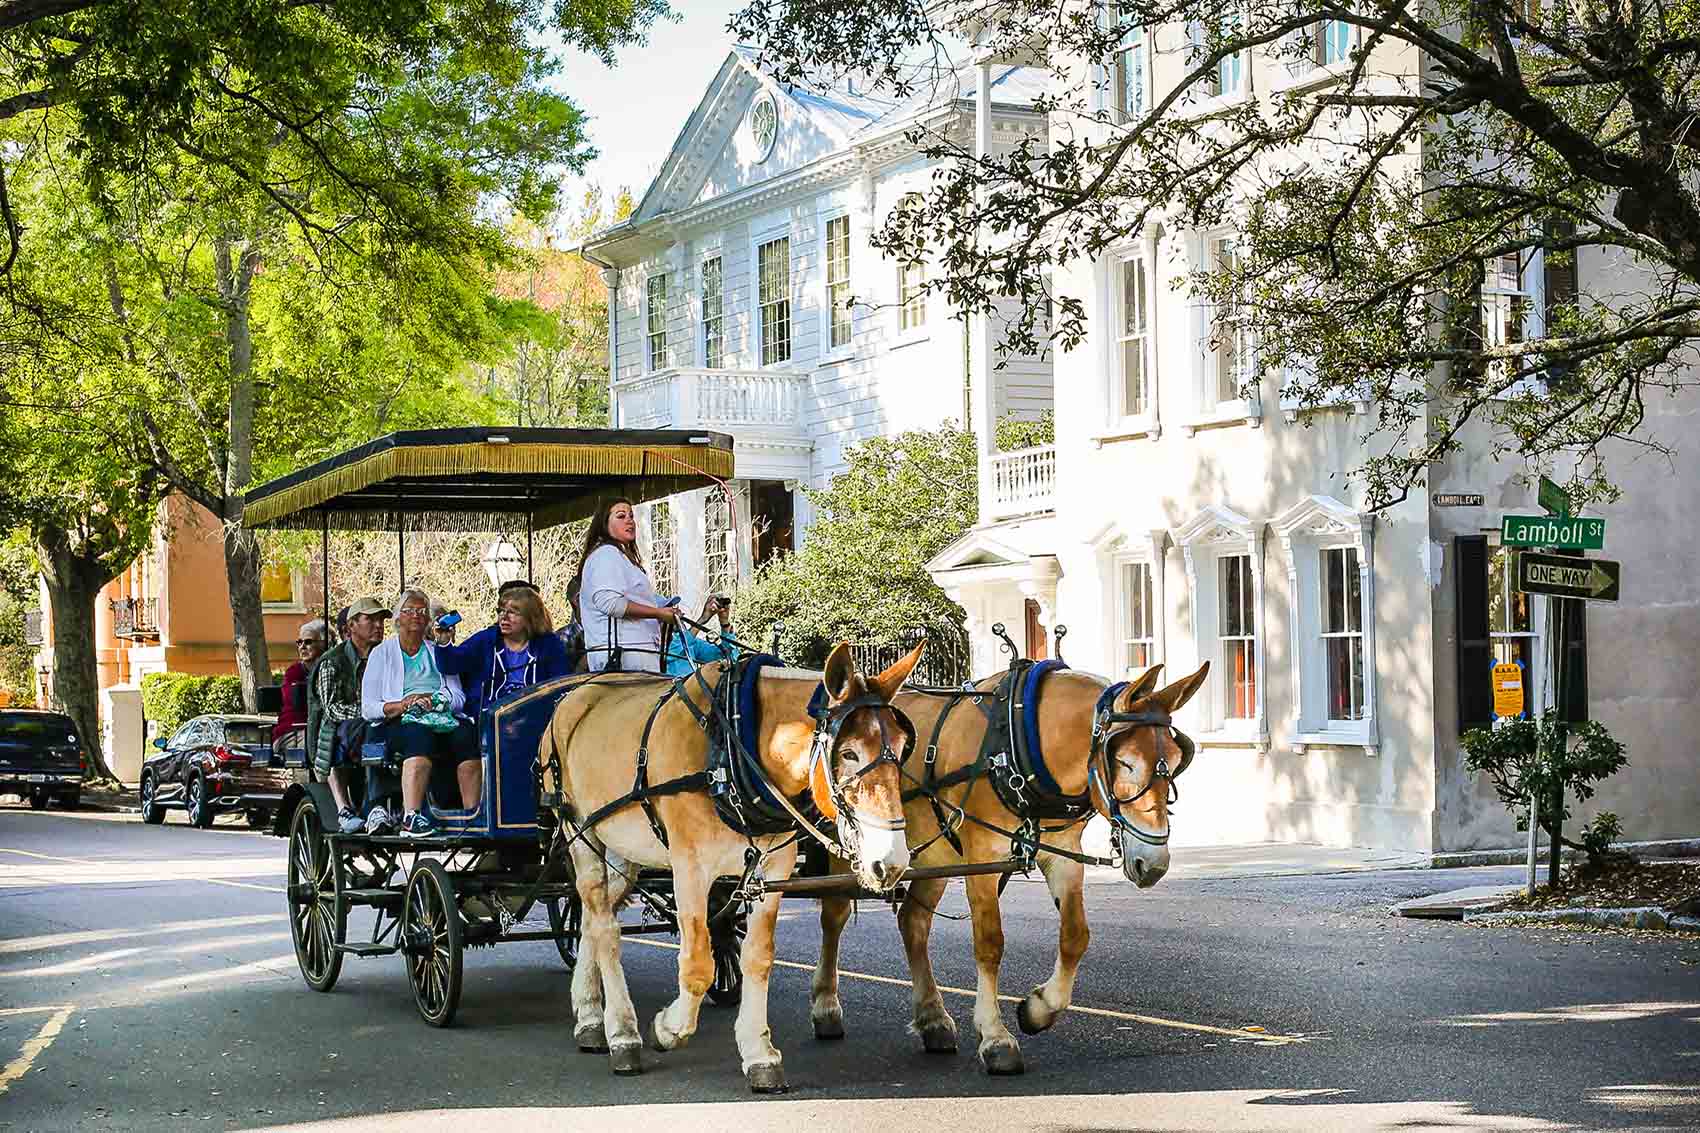 WHEN A HISTORY LOVER HEADS TO CHARLESTON – HOW TO PLAN LIKE A LOCAL